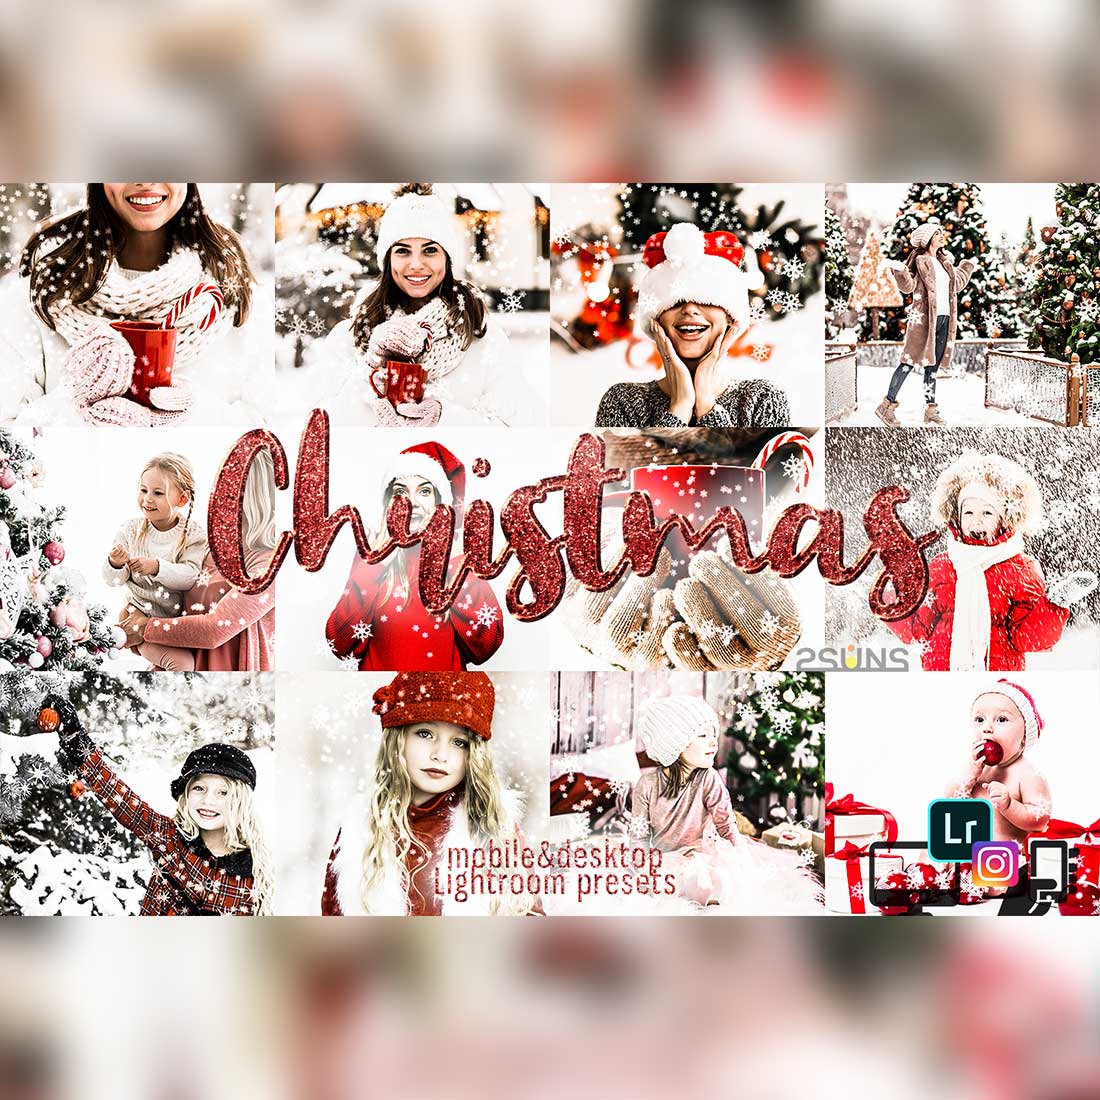 Bright Winter Christmas Lightroom Presets Cover Image.